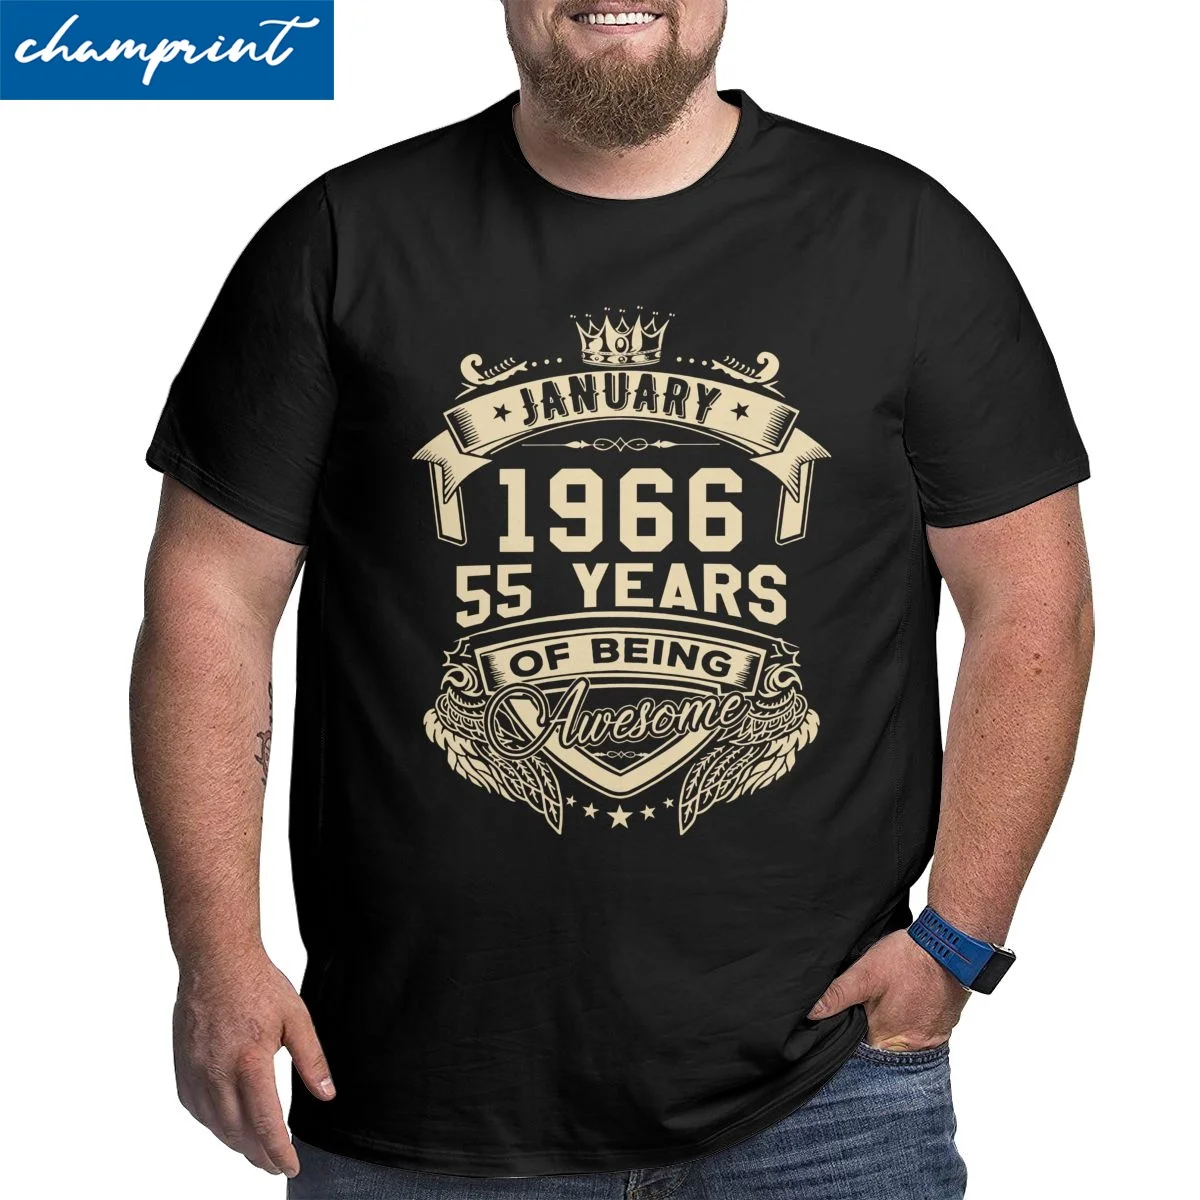 

Men T-Shirt Born In January 1966 55 Years Of Being Awesome Vintage Big Tall Tee Shirt 55th Birthday Gift T Shirts 5XL 6XL Tops